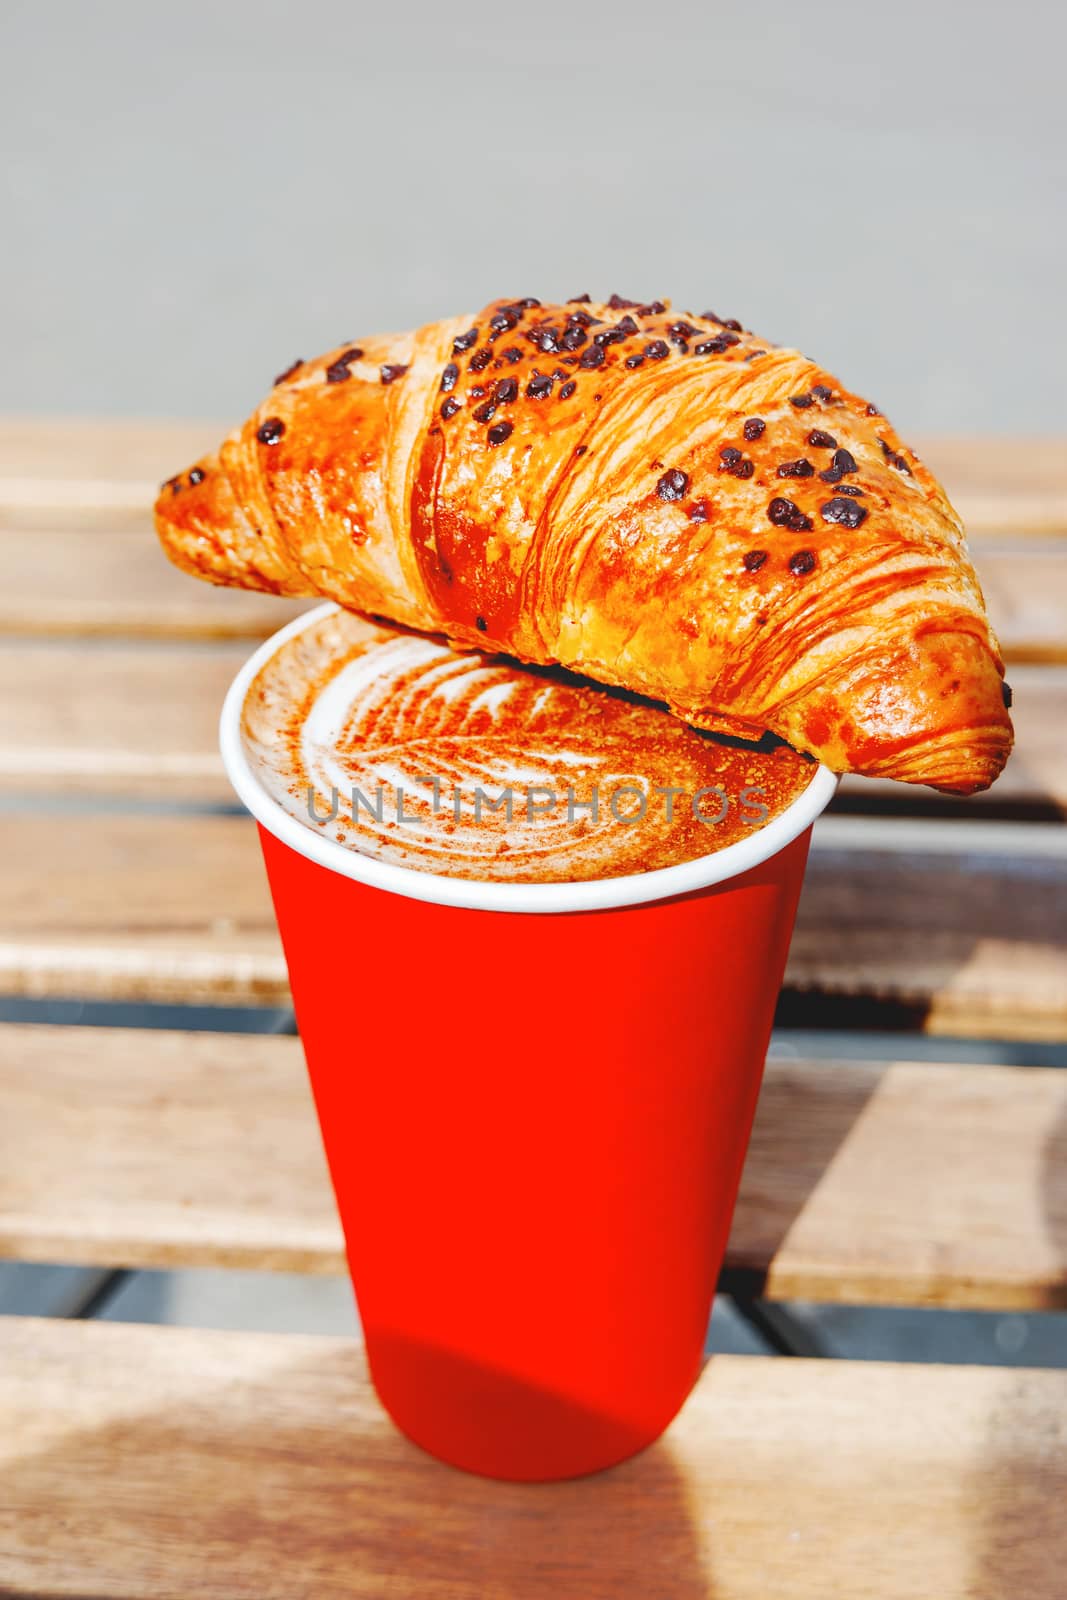 Red paper cup with coffee and chocolate croissant. Coffee to go. Tasty hot beverage on wooden table in sunny day. Outdoors meal.